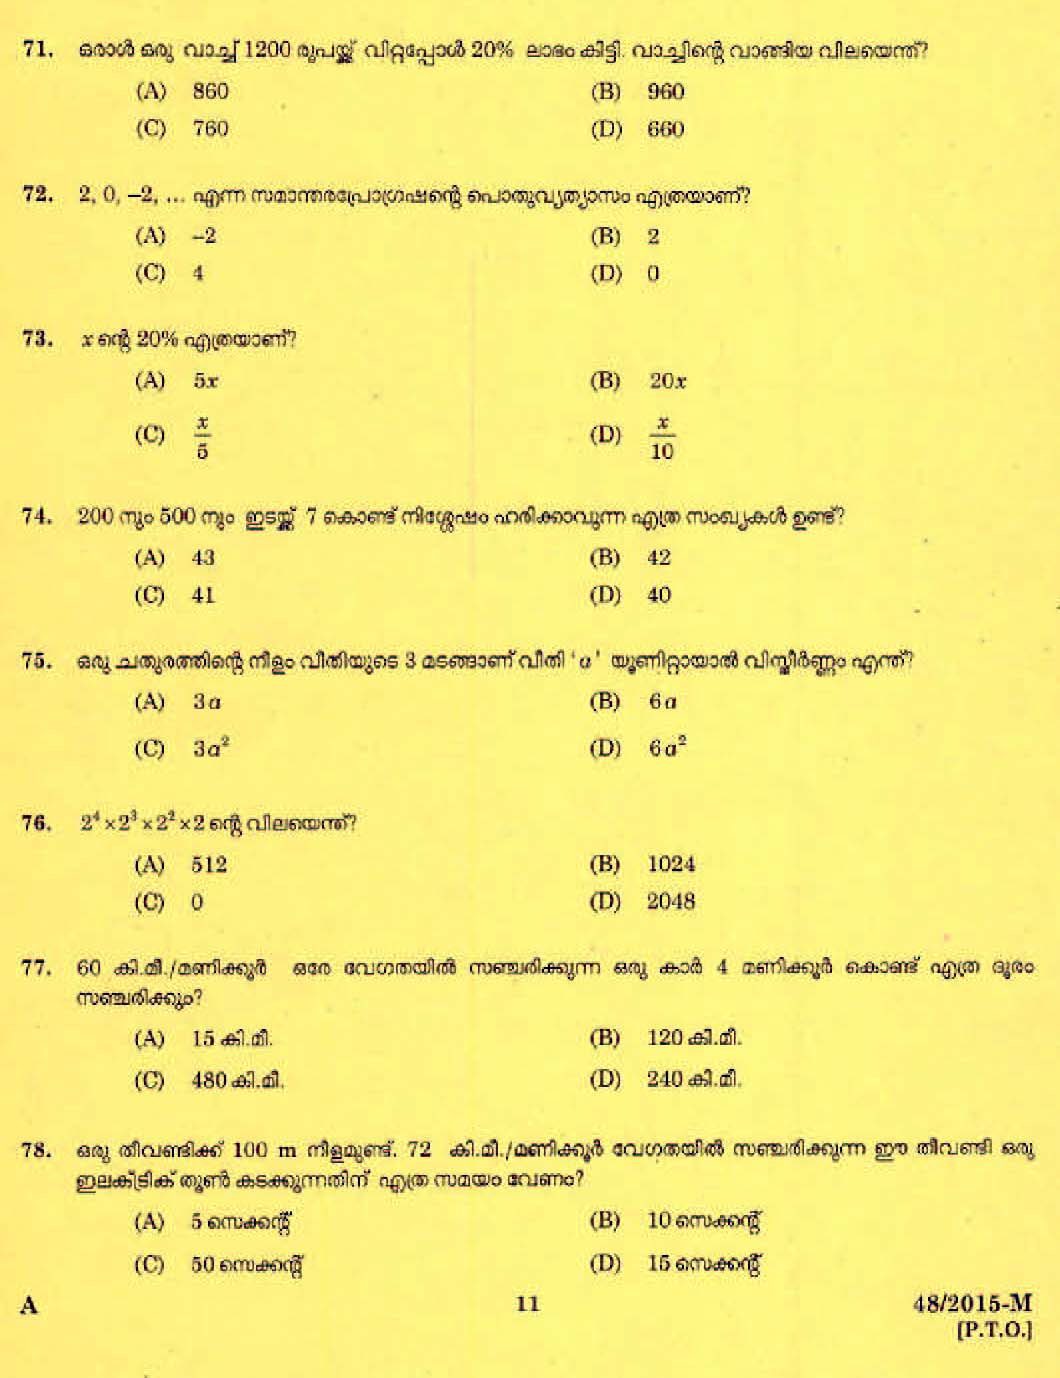 LD Clerk Bill Collector Question Paper Malayalam 2015 Paper Code 482015 M 9